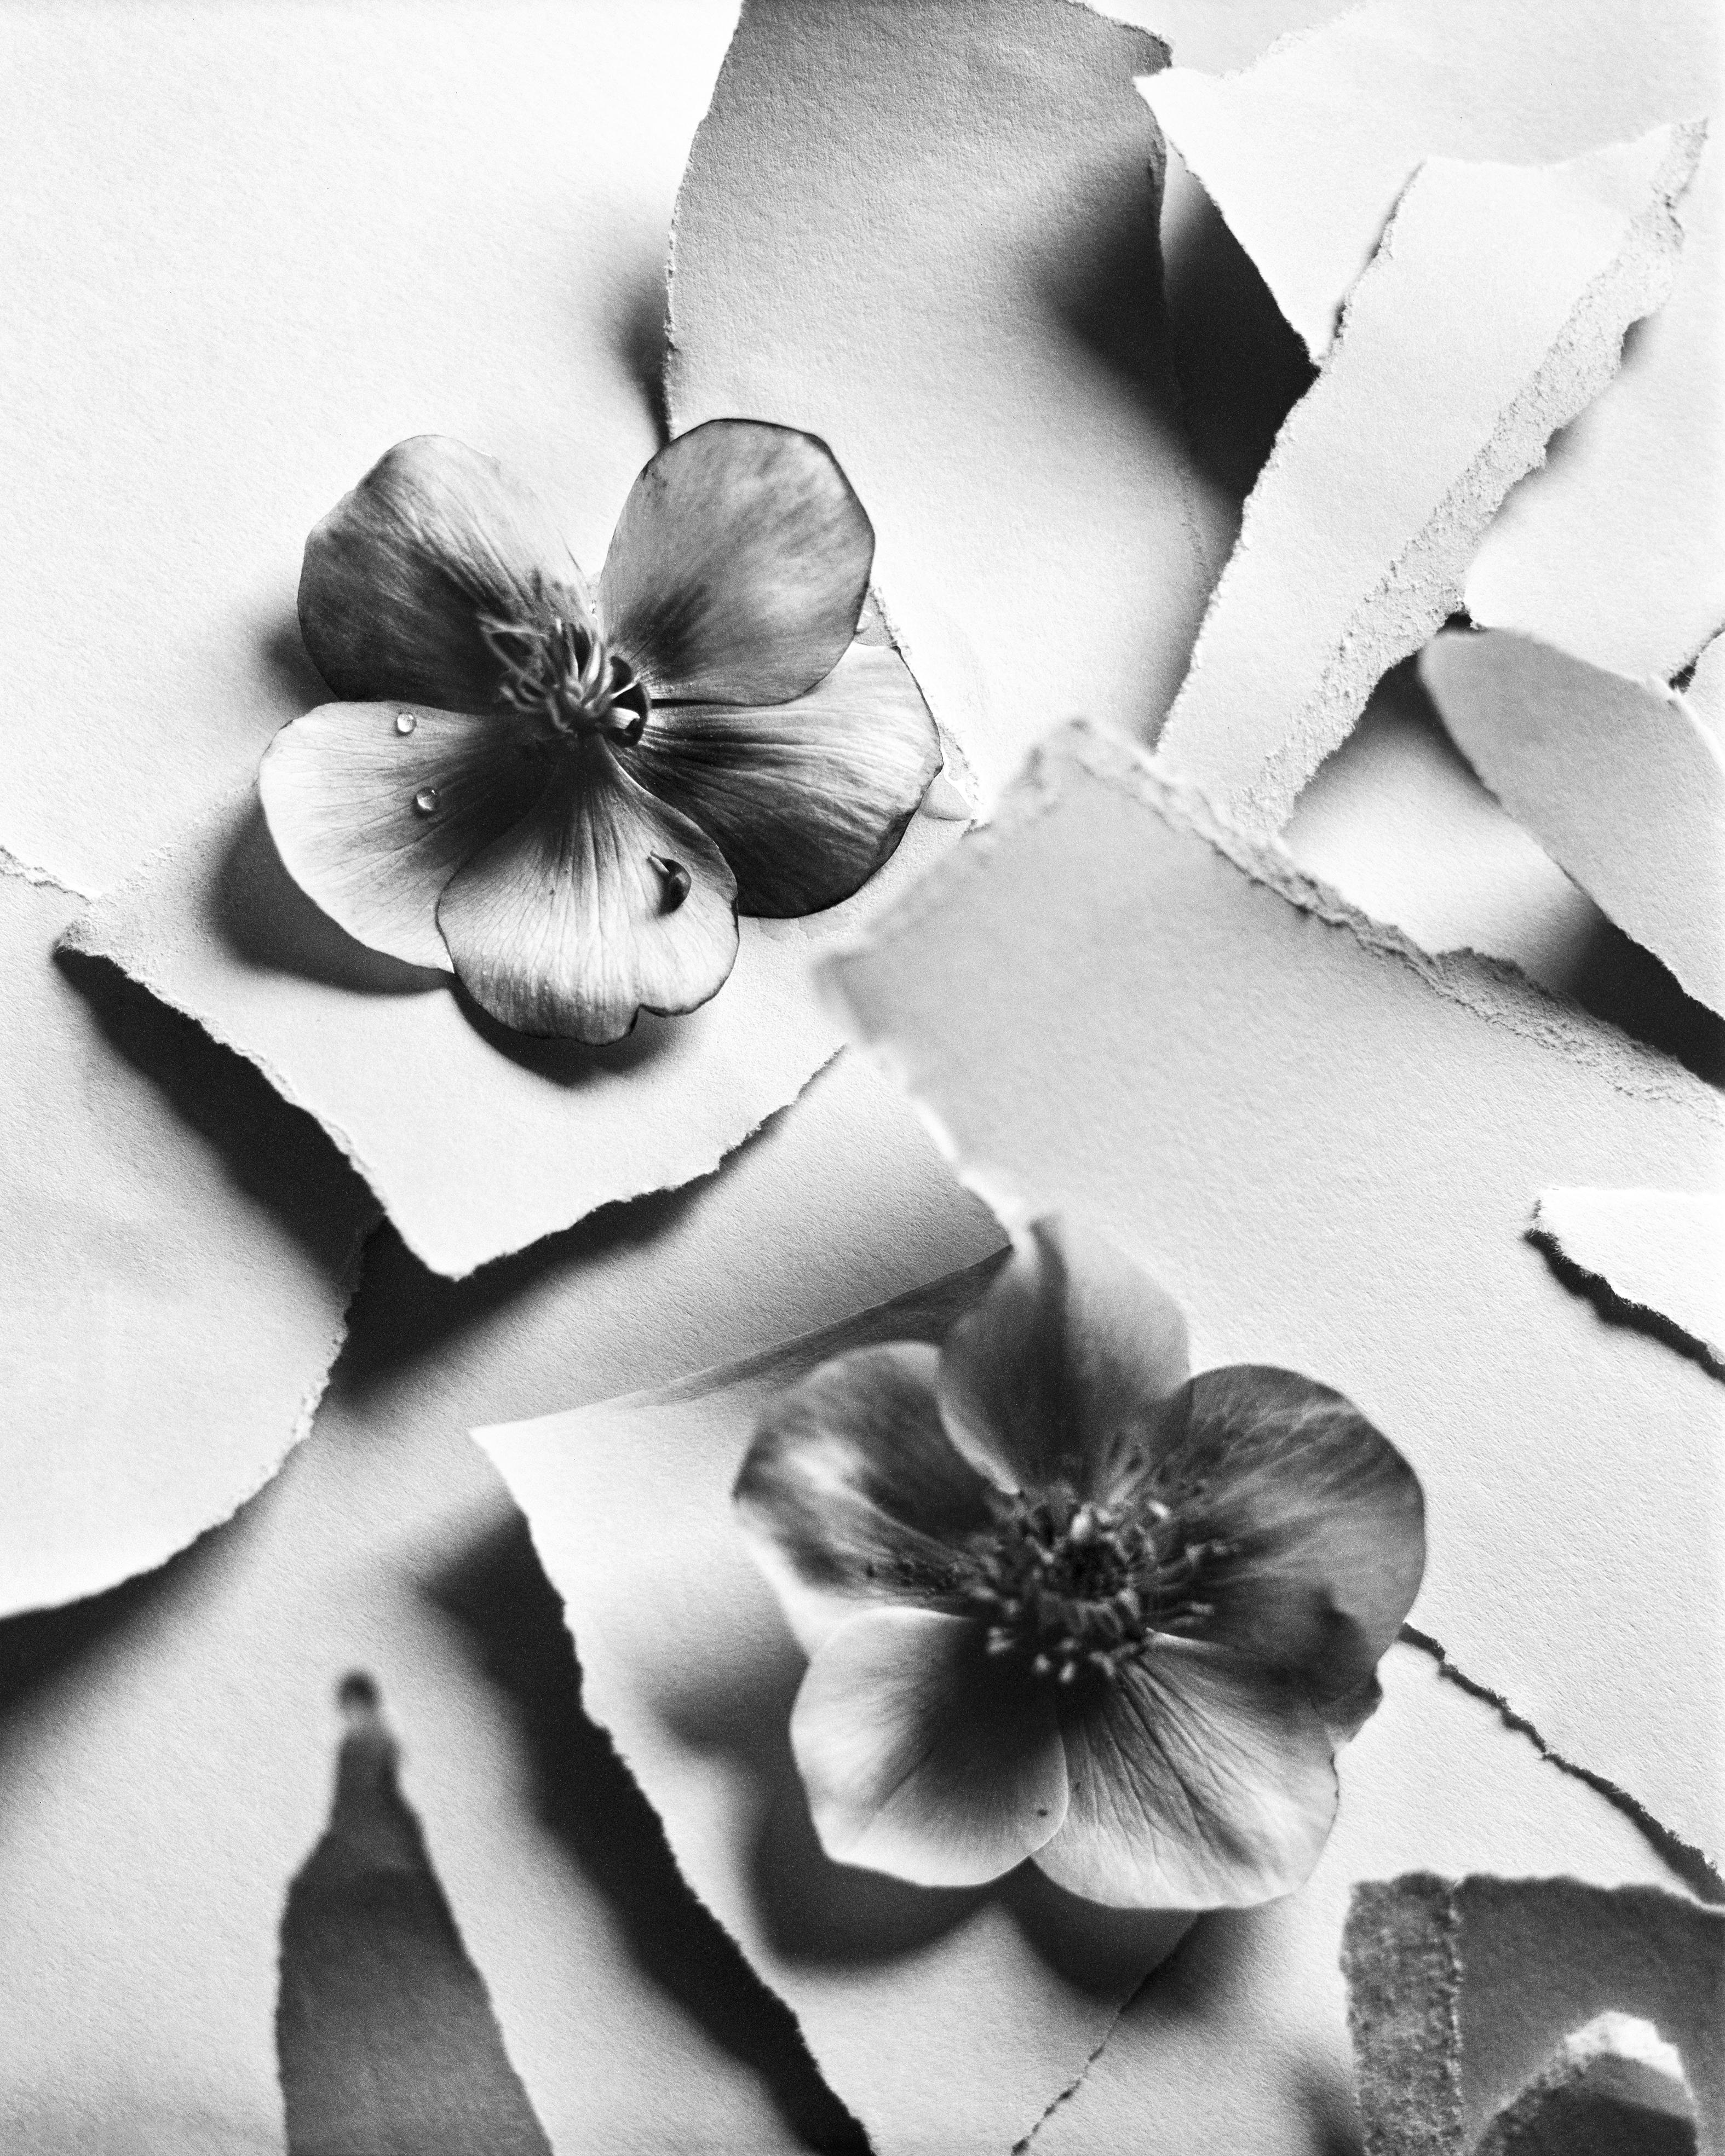 Ugne Pouwell Black and White Photograph - Black Hellebore No.2 - analogue black and white floral photography